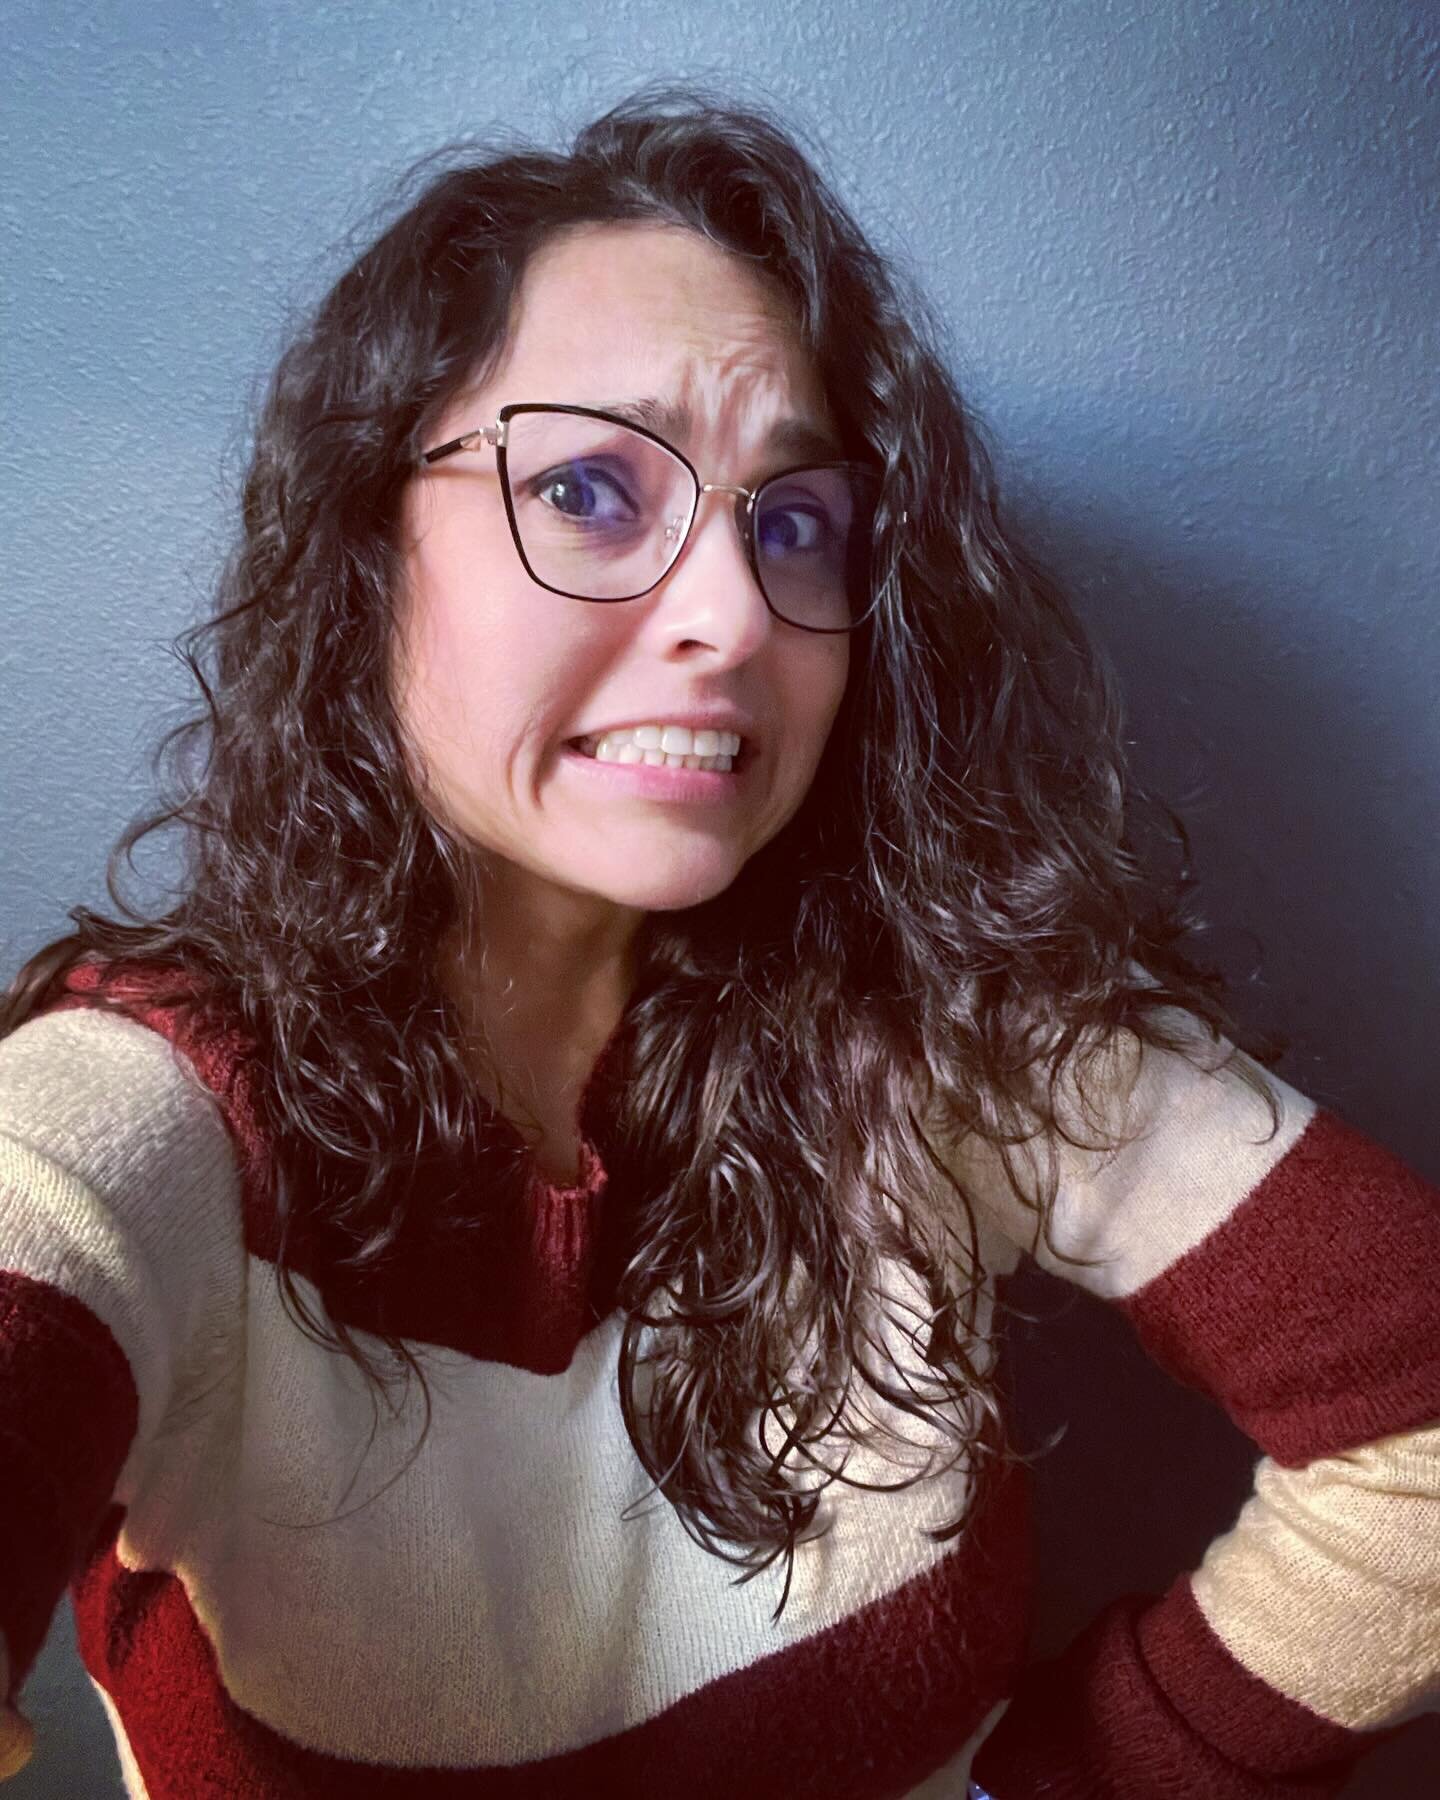 It&rsquo;s officially sweater weather for me and I&rsquo;m cringing at looming dust mite reactions. 🙀 Hopefully I picked a safe one this morning! Stay warm and itch free, eczema peeps! #itchypineapple #dustmiteallergy #eczema #skinallergy